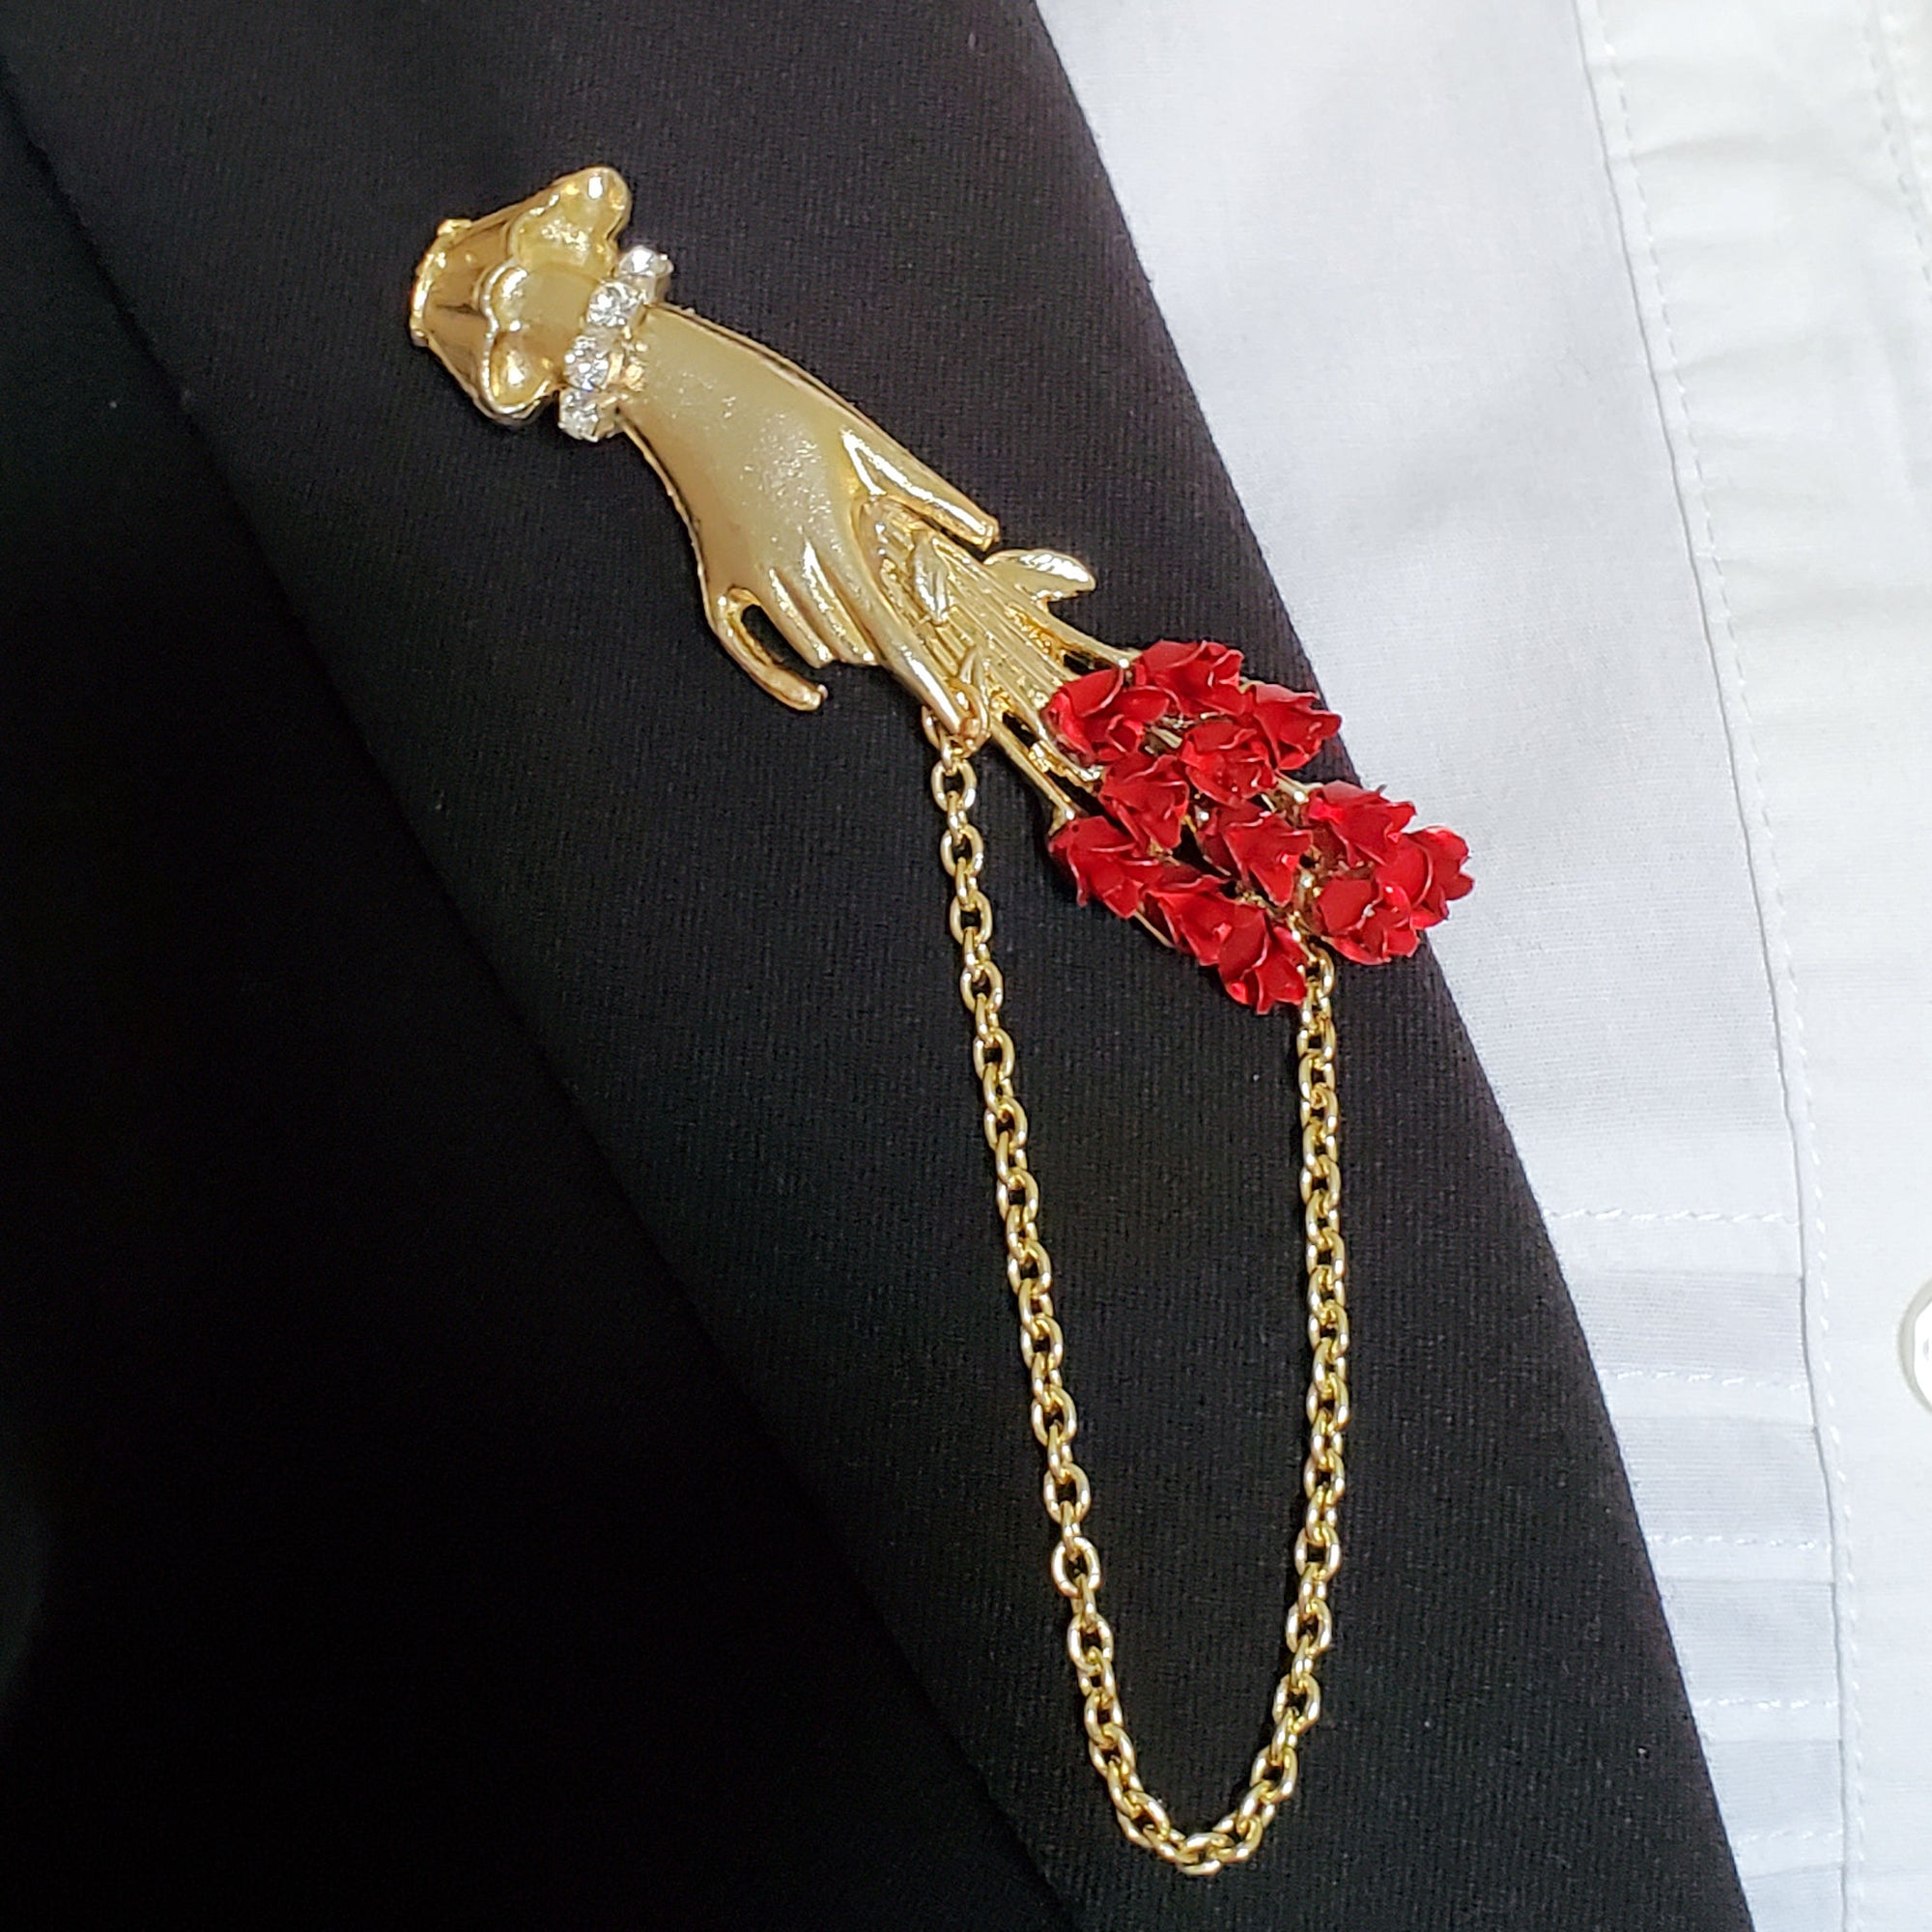 Victorian Style Hand Brooch with Red Roses